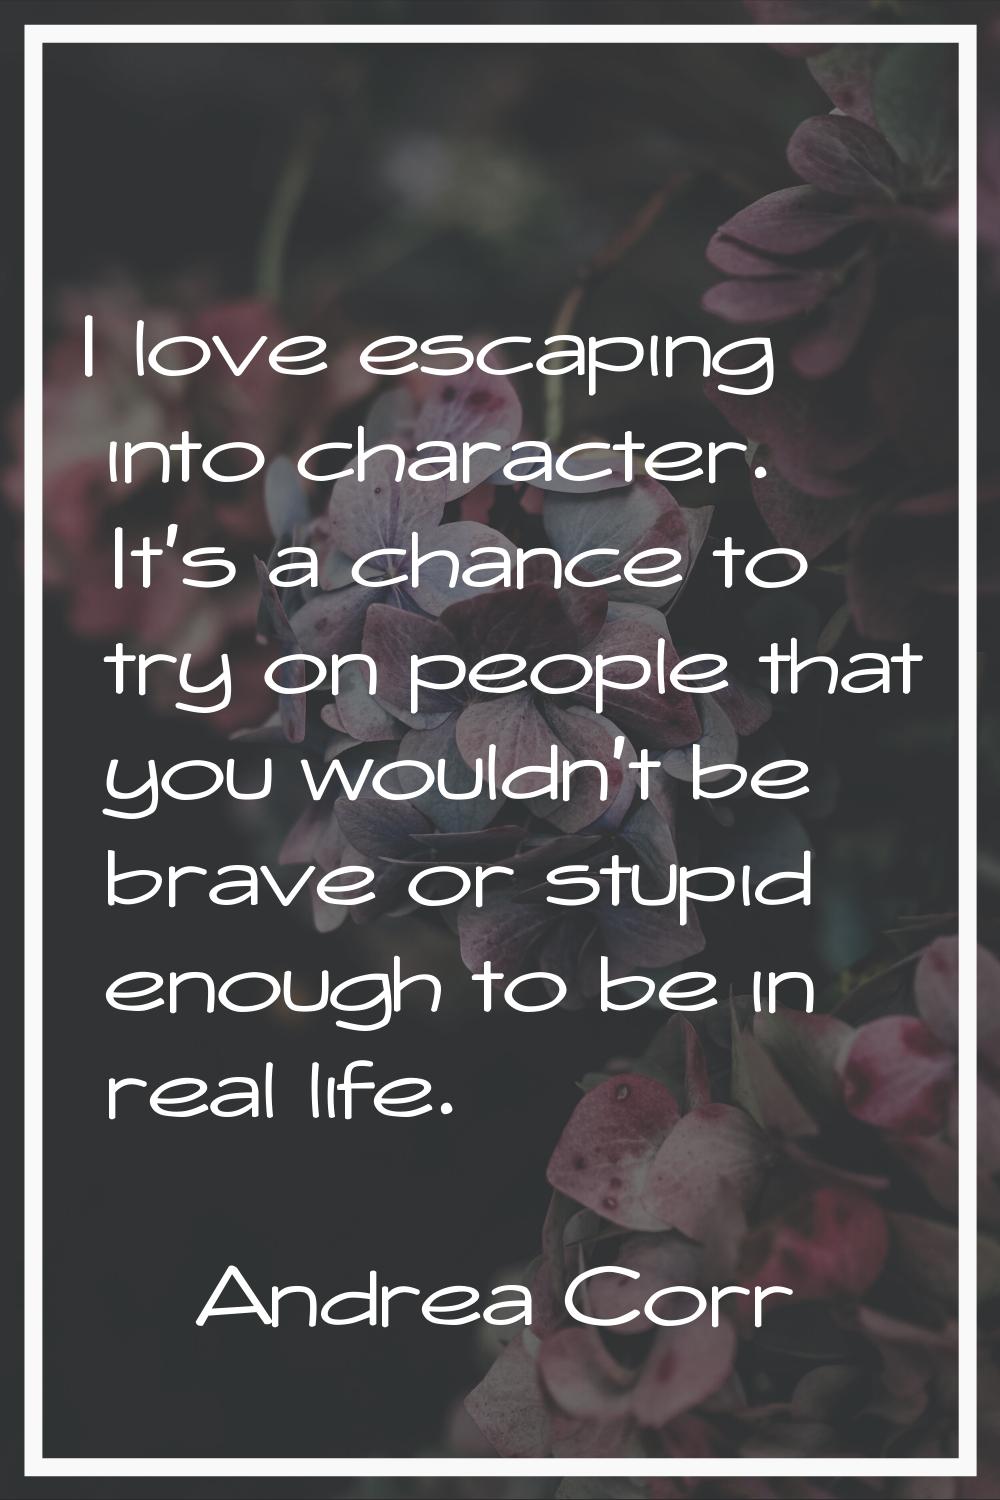 I love escaping into character. It's a chance to try on people that you wouldn't be brave or stupid